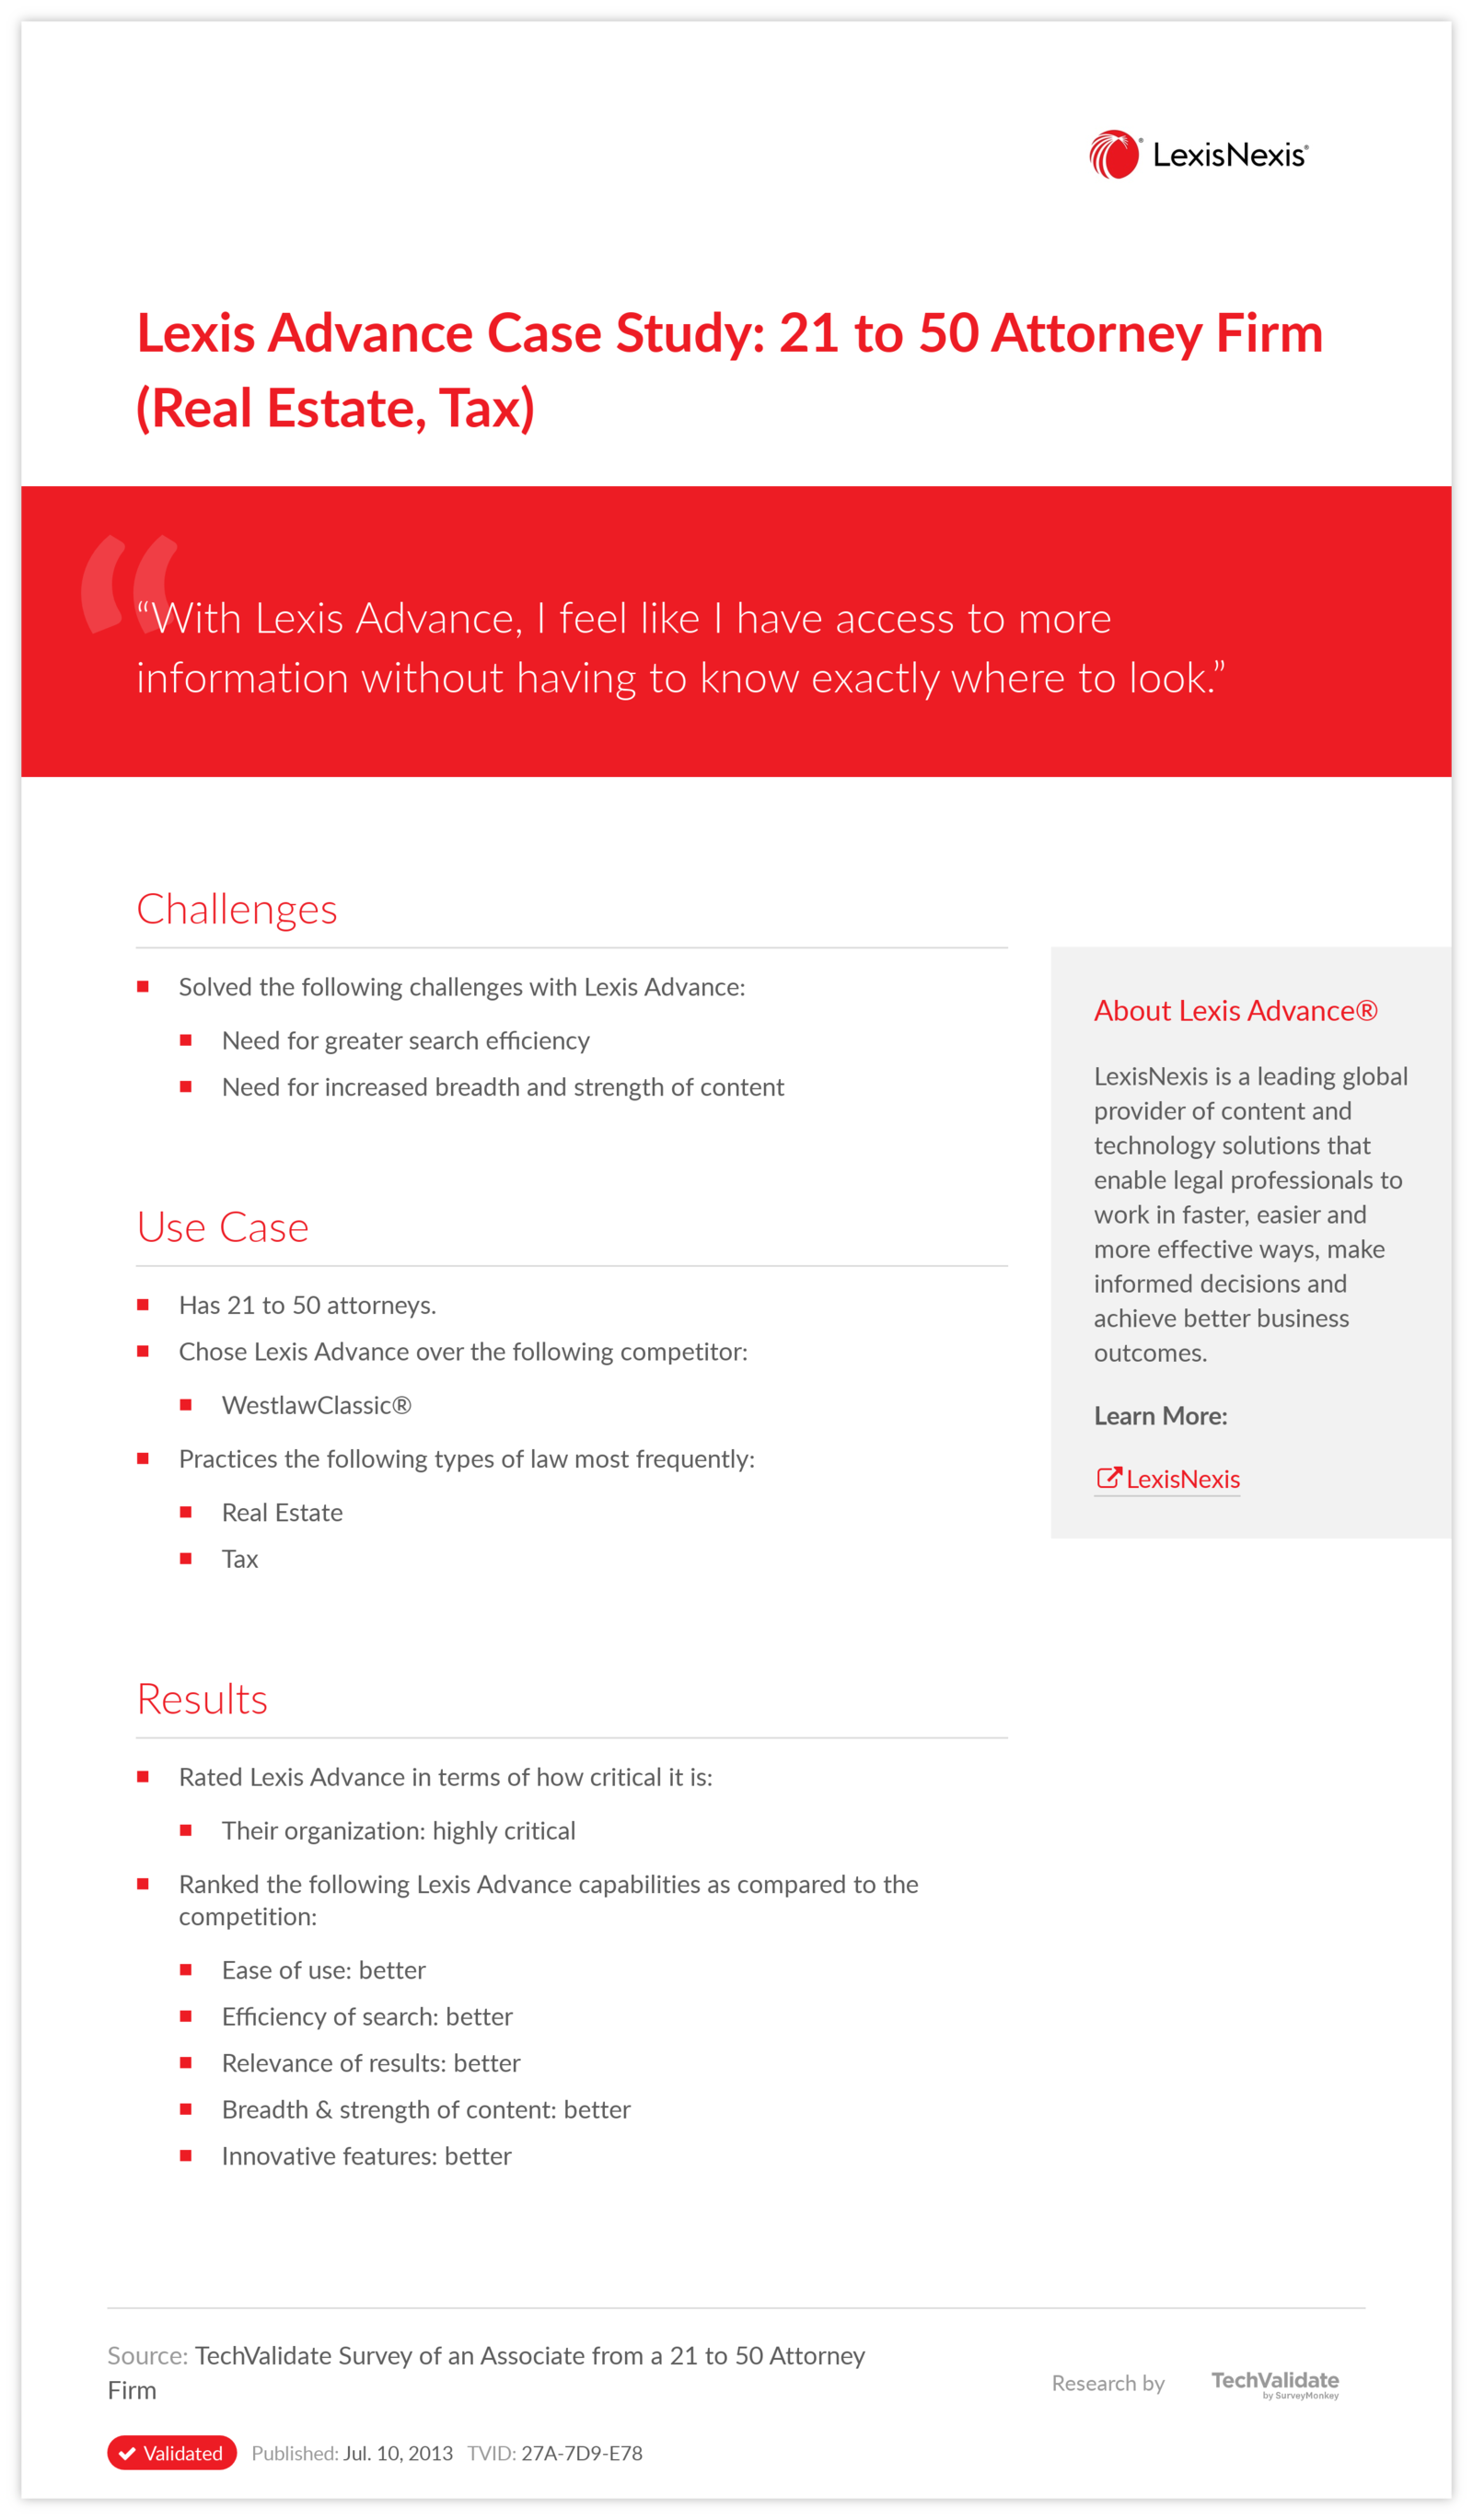 Lexis Advance Case Study: 21 to 50 Attorney Firm (Real Estate, Tax)